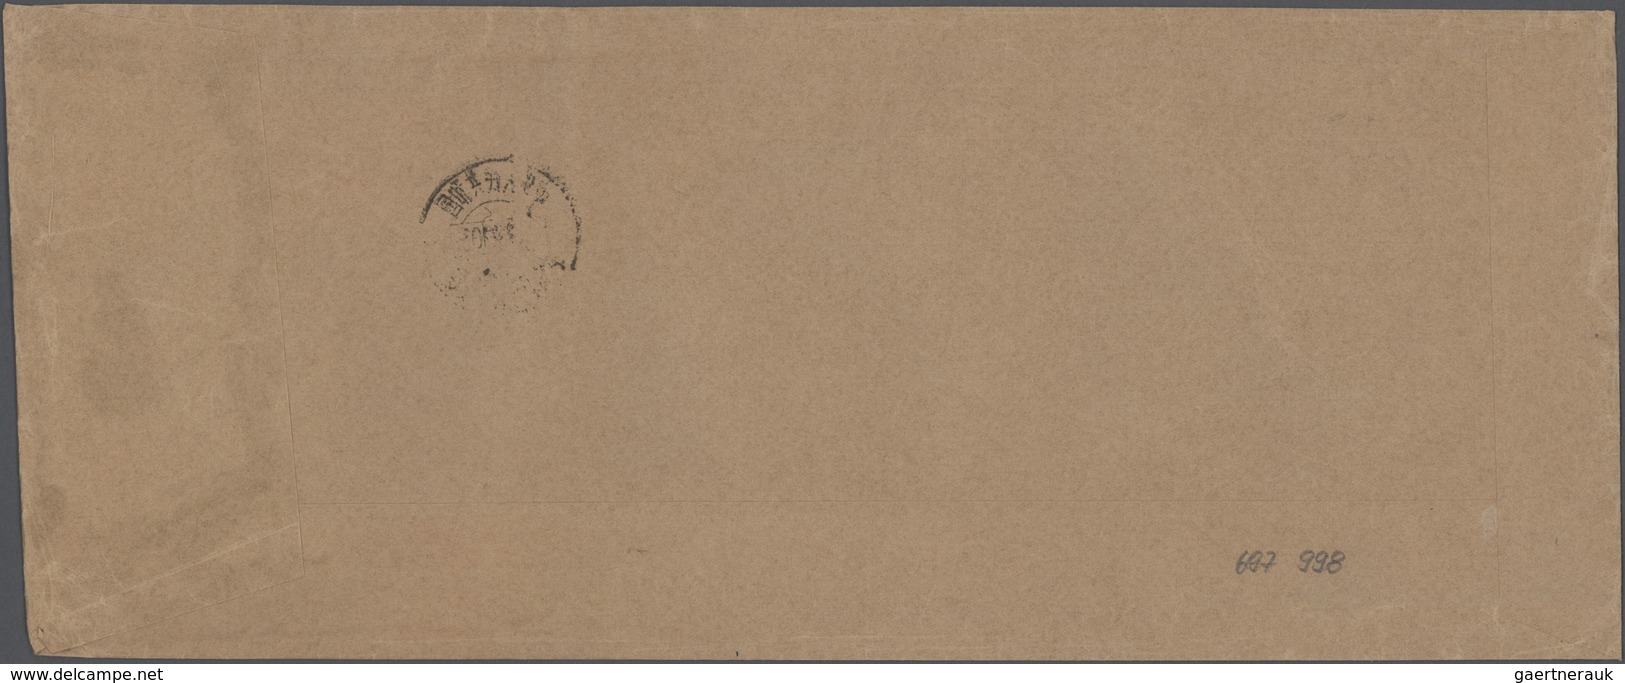 China - Volksrepublik: 1963/67, 3 Wrapper Covers From Guozi Shudian, Addressed To Kreis Limburg, Wes - Lettres & Documents